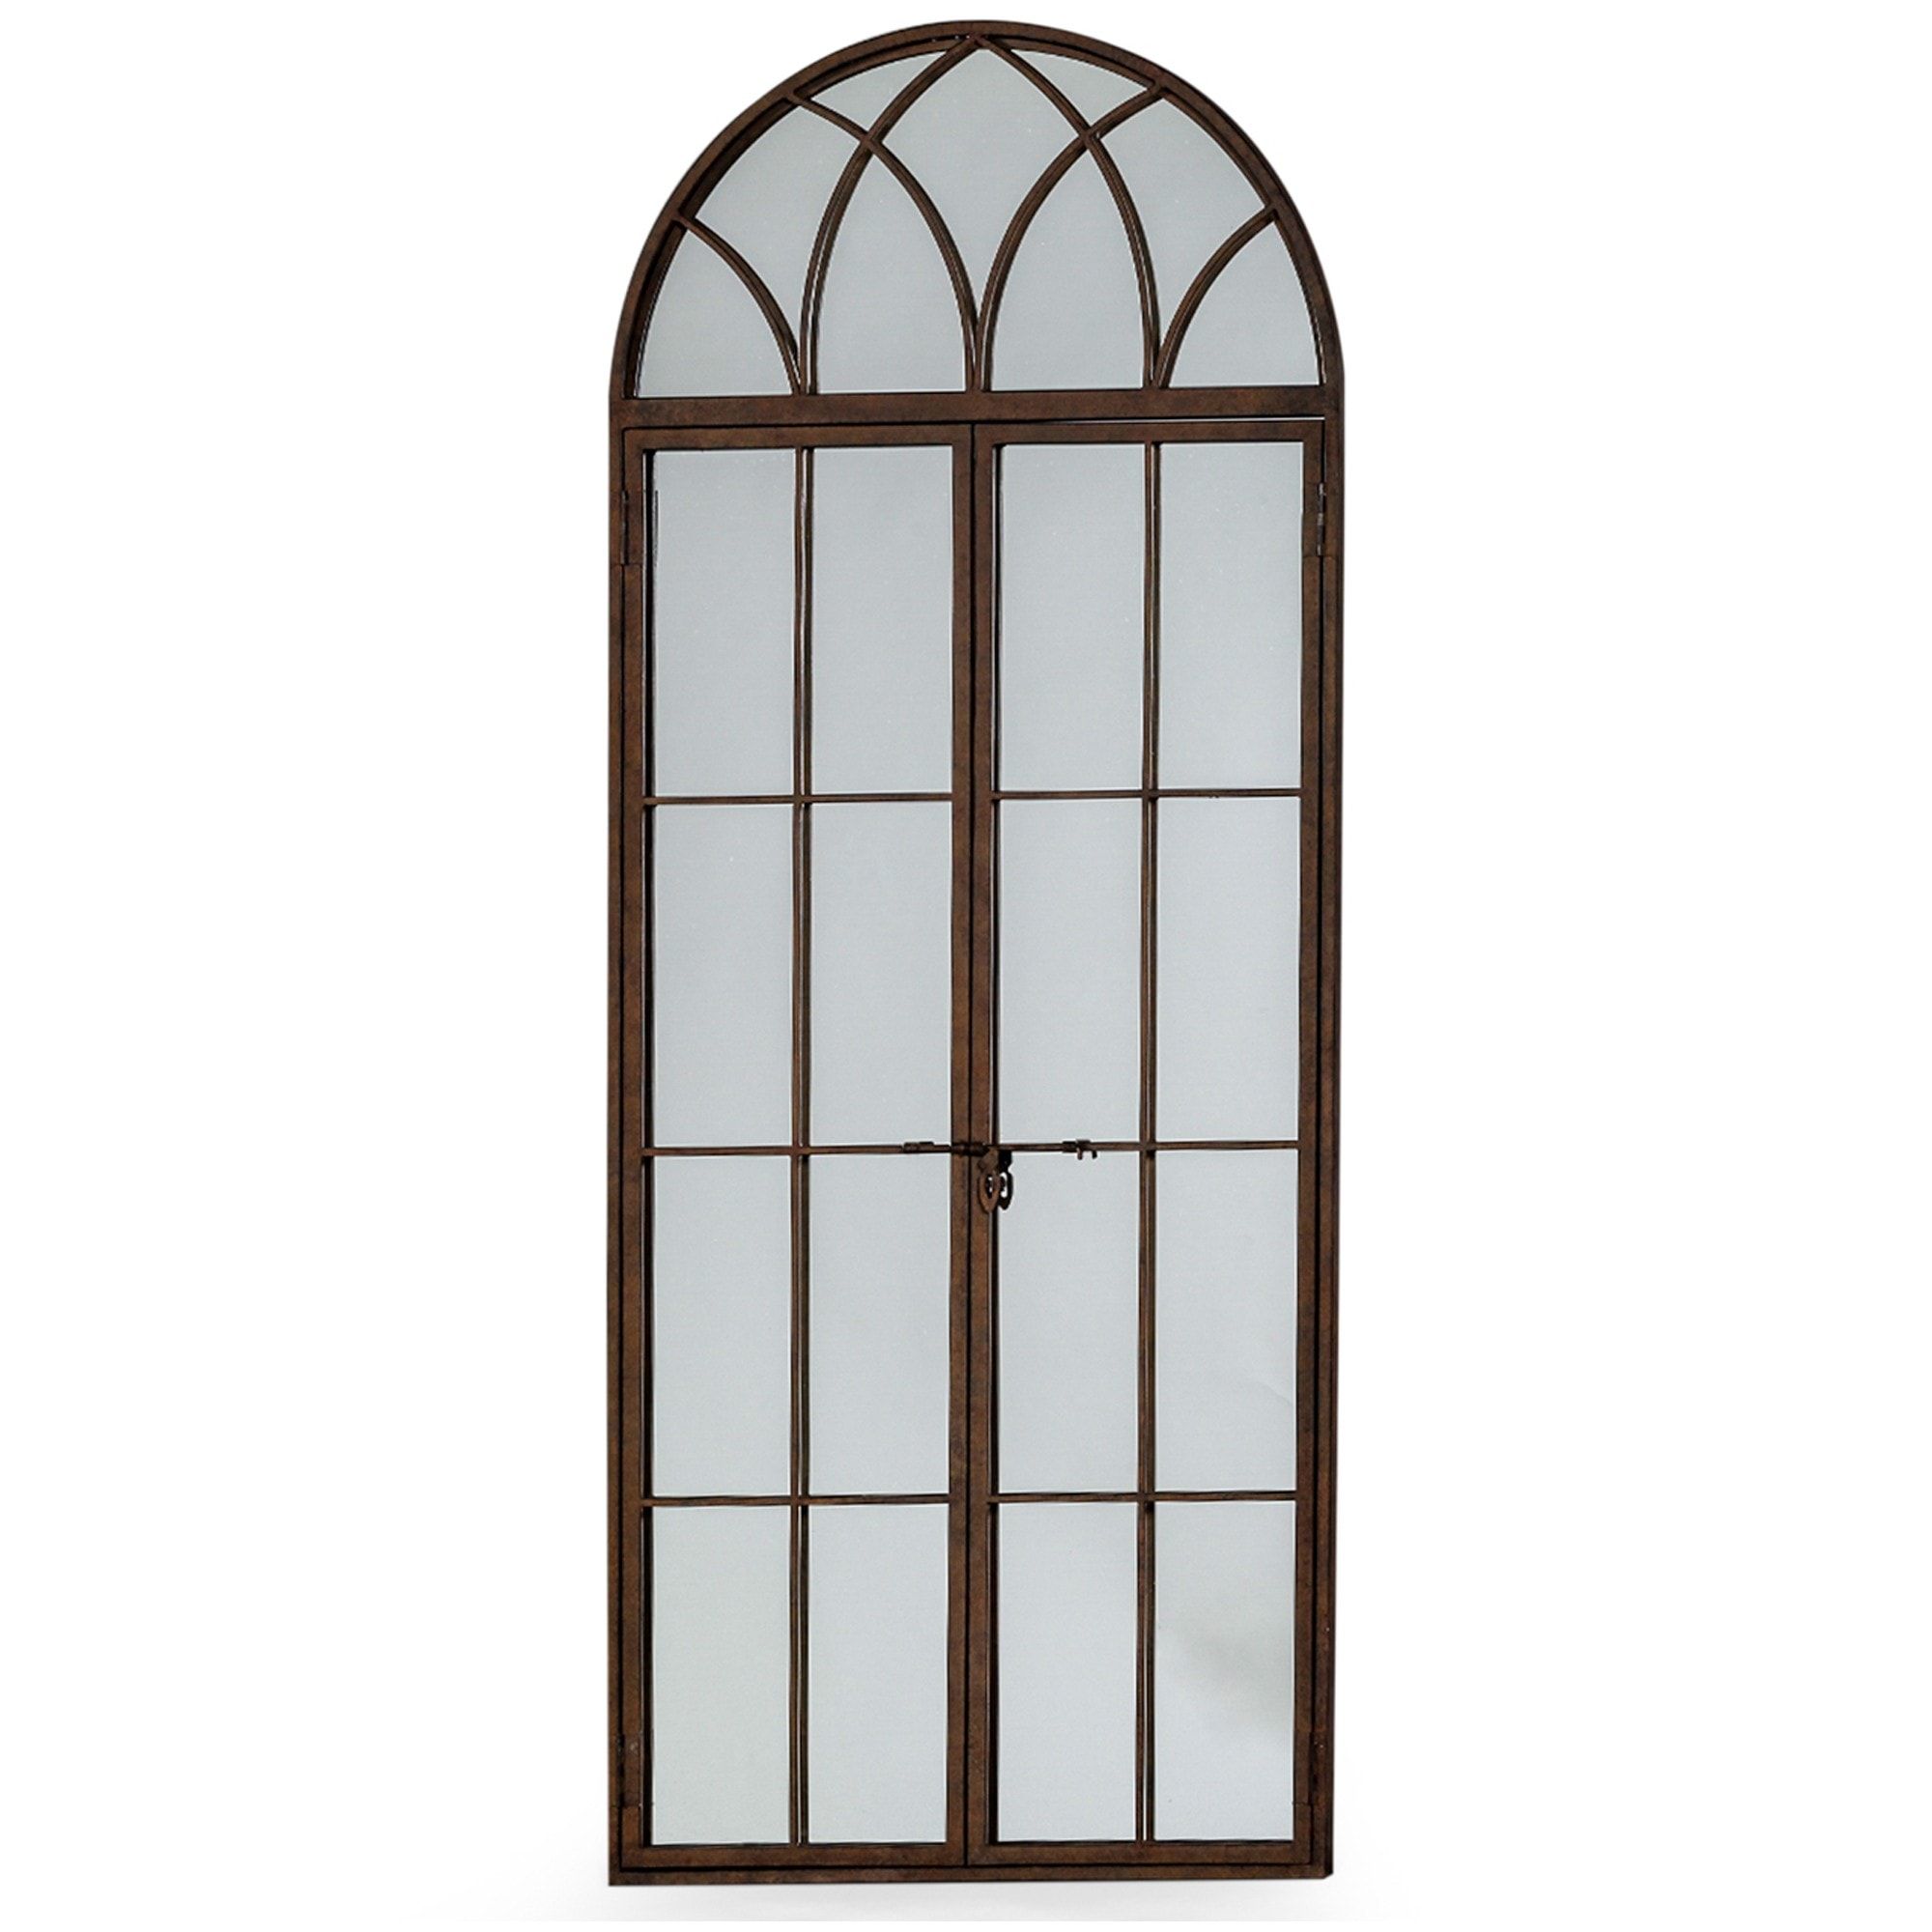 Antiqued Iron Tall Arch Window Metal Mirror | Window Mirror With Metal Arch Window Wall Mirrors (View 13 of 15)